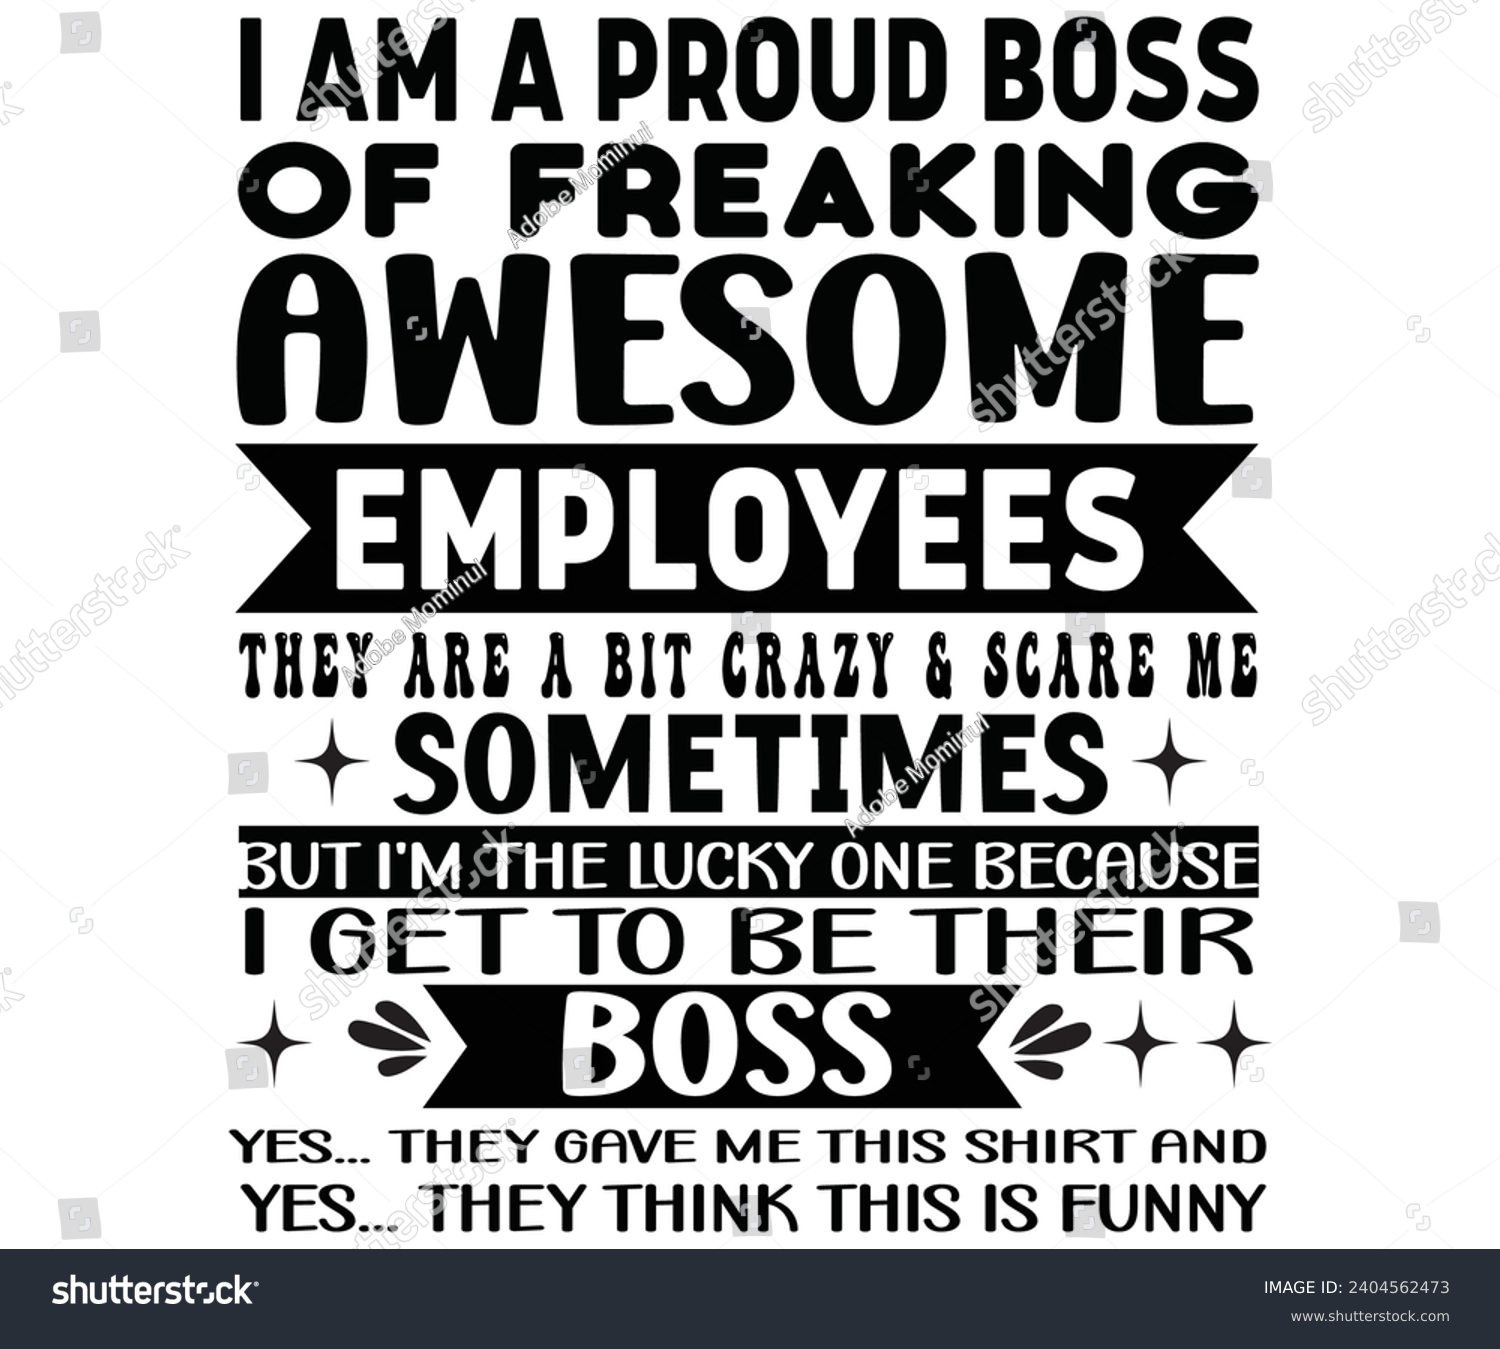 SVG of I'm A Proud Boss Of Freaking Awesome Empolyees Svg,Happy Boss Day svg,Boss Saying Quotes,Boss Day T-shirt,Gift for Boss,Great Jobs,Happy Bosses Day t-shirt,Girl Boss Shirt,Motivational Boss,Cut File, svg